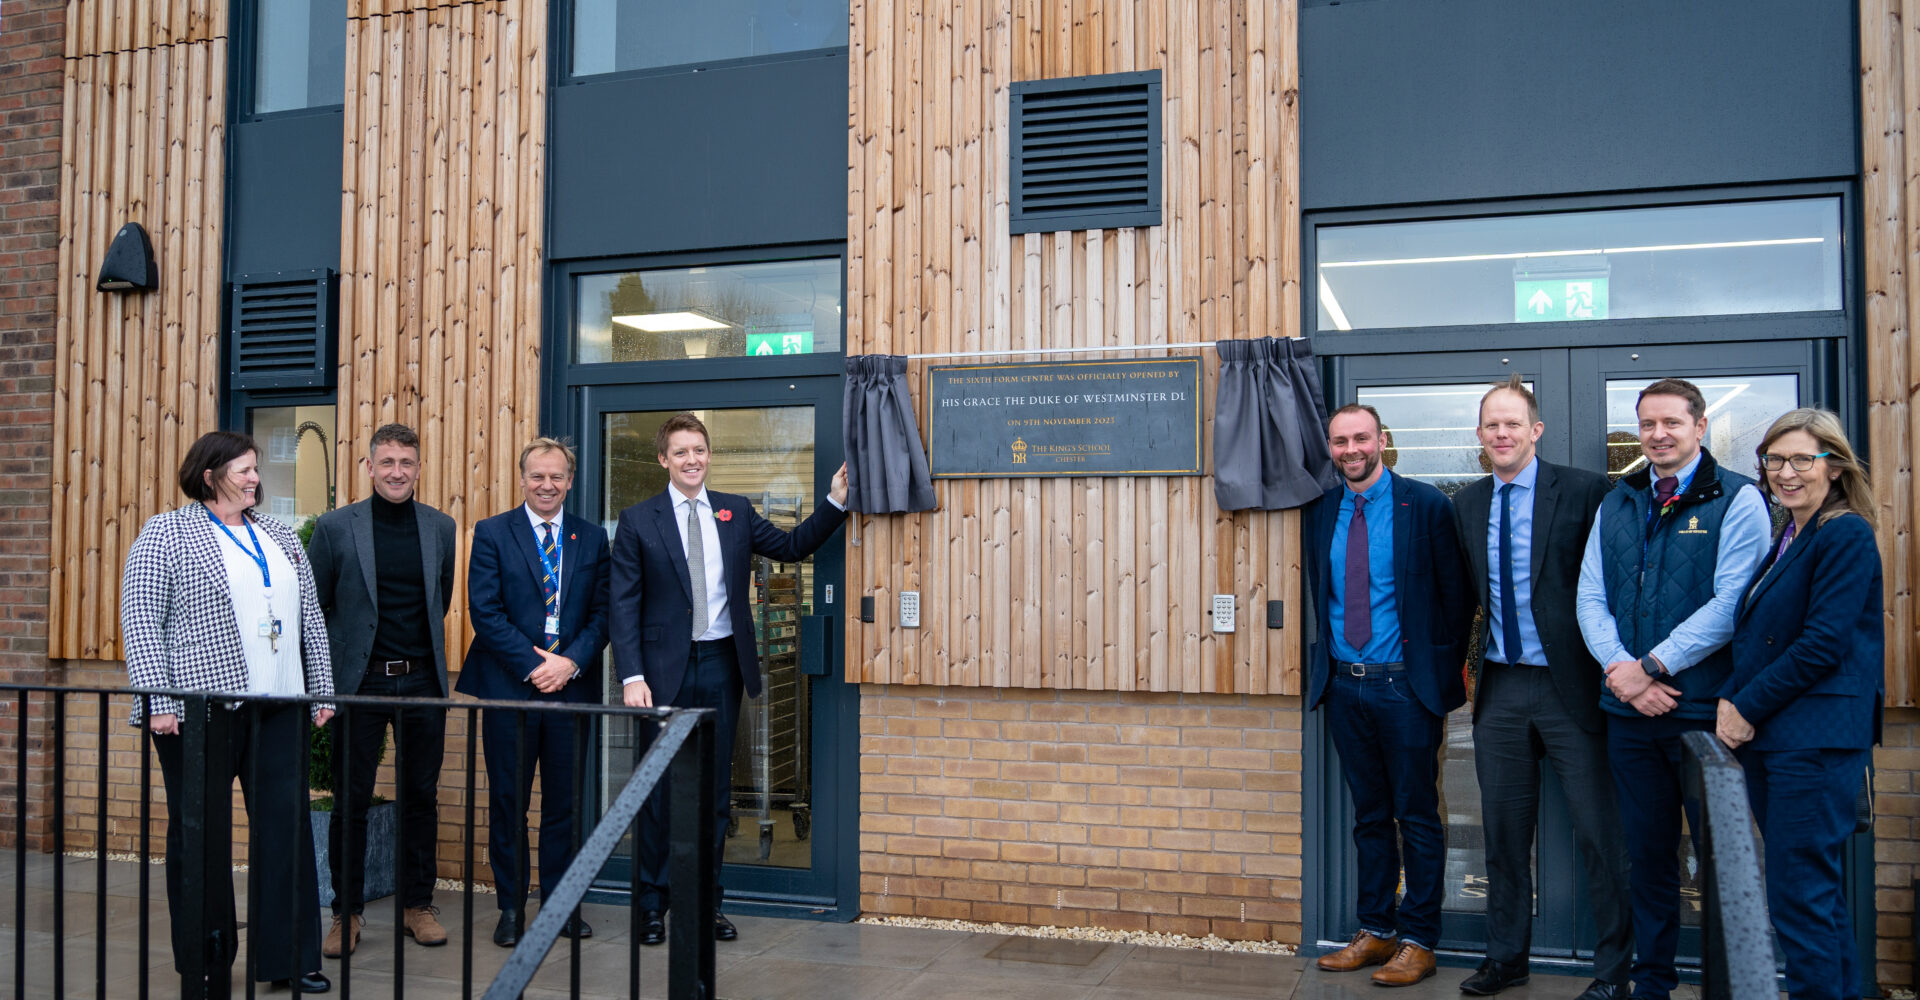 Official Opening of Sixth Form Centre by His Grace The Duke of Westminster